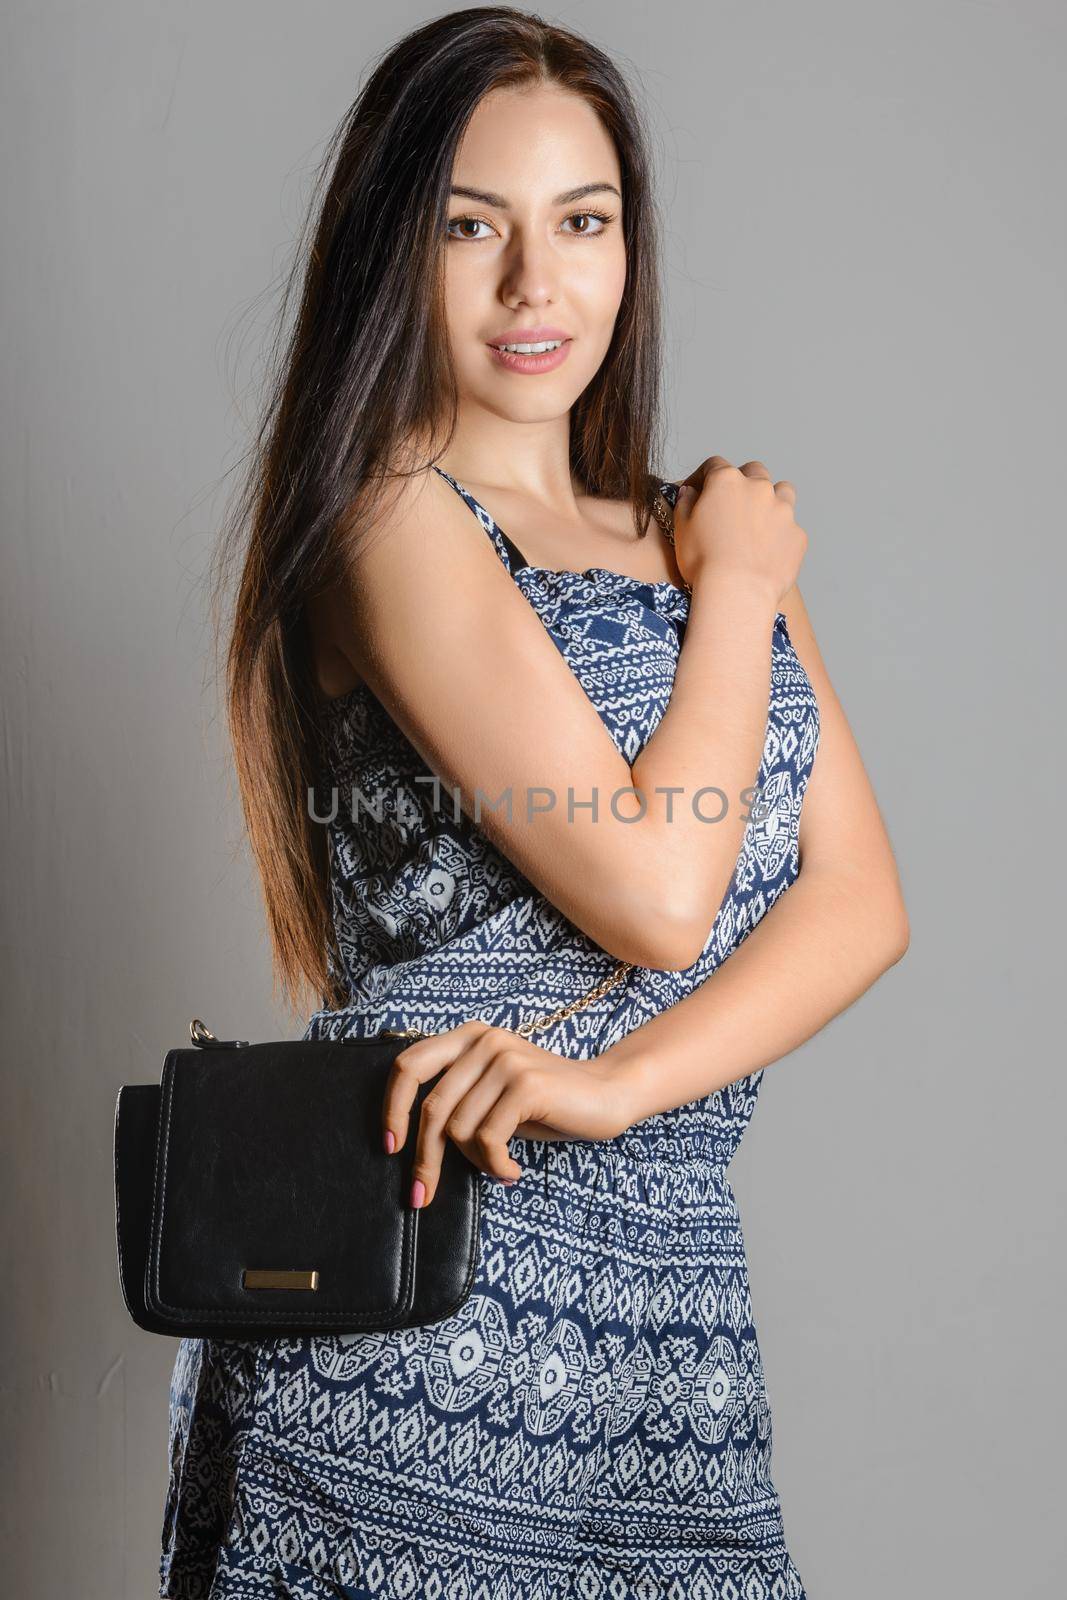 Cute brunette girl with long flowing hair holding a black handbag wearing a sundress with ornament